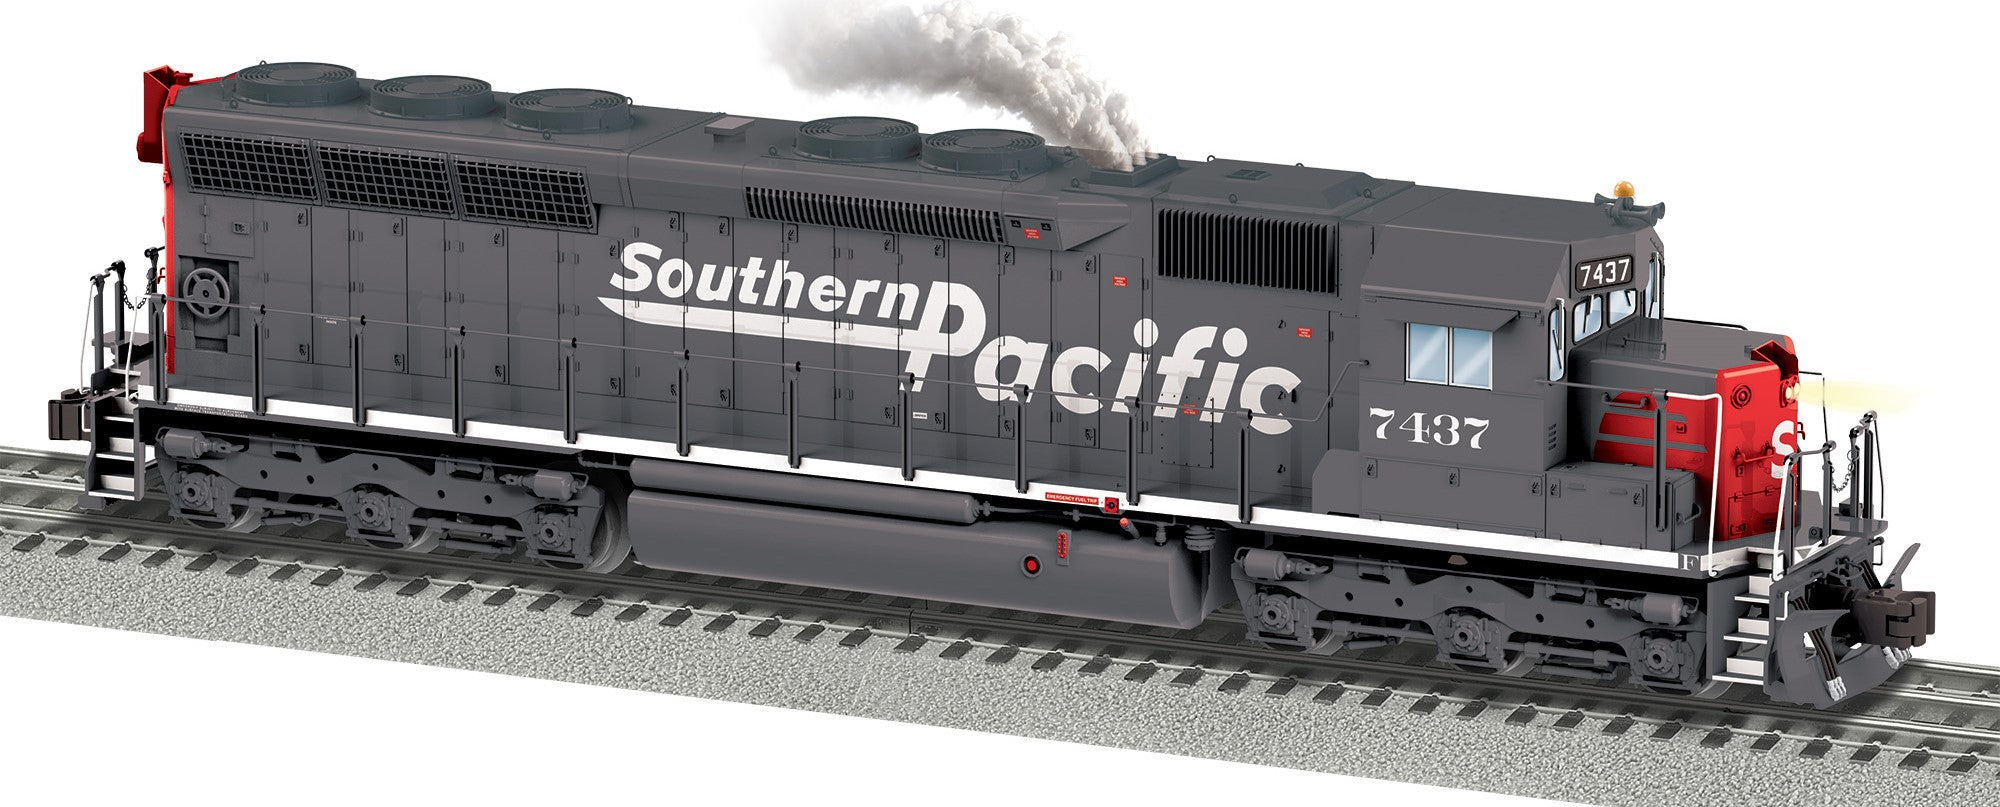 Lionel 2433572 - Legacy SD45 Diesel Locomotive "Southern Pacific" #7437